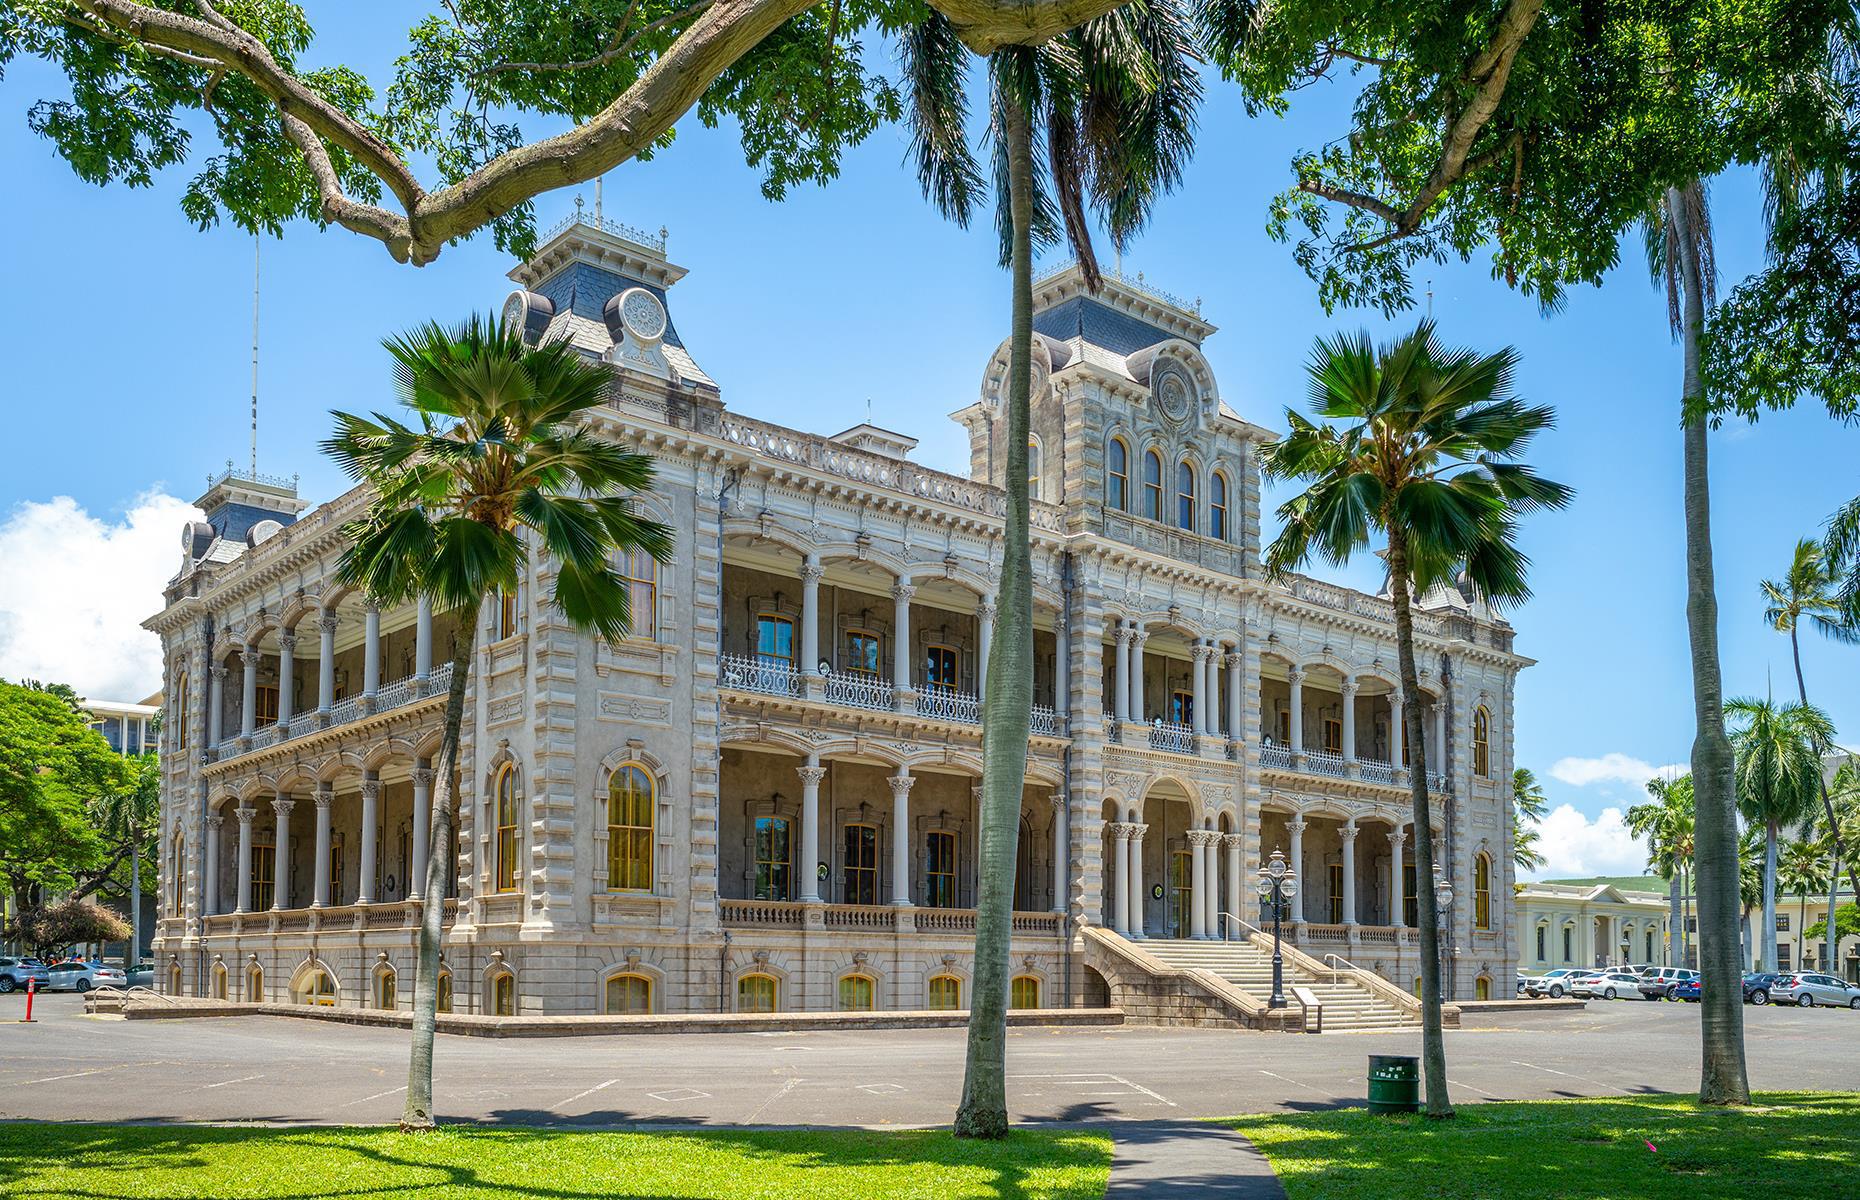 <p>As the only royal residence in the United States, Honolulu's Iolani Palace is truly unique. Completed in 1882, it served as the seat of the Hawaiian monarchy. Queen Liliuokalani was Hawaii's last sovereign and the splendid building offers an interesting insight into the affairs of the monarchy. Today, several <a href="https://www.iolanipalace.org/visit/tours-admission/guided-tours/">guided tours</a> are available – the volunteer docent-led tour is among the best and dives into the history of the palace, as well as its royal residents. Tours are available on Wednesdays and Thursdays for $32.95 (various discounts for under-18s and the military apply).</p>